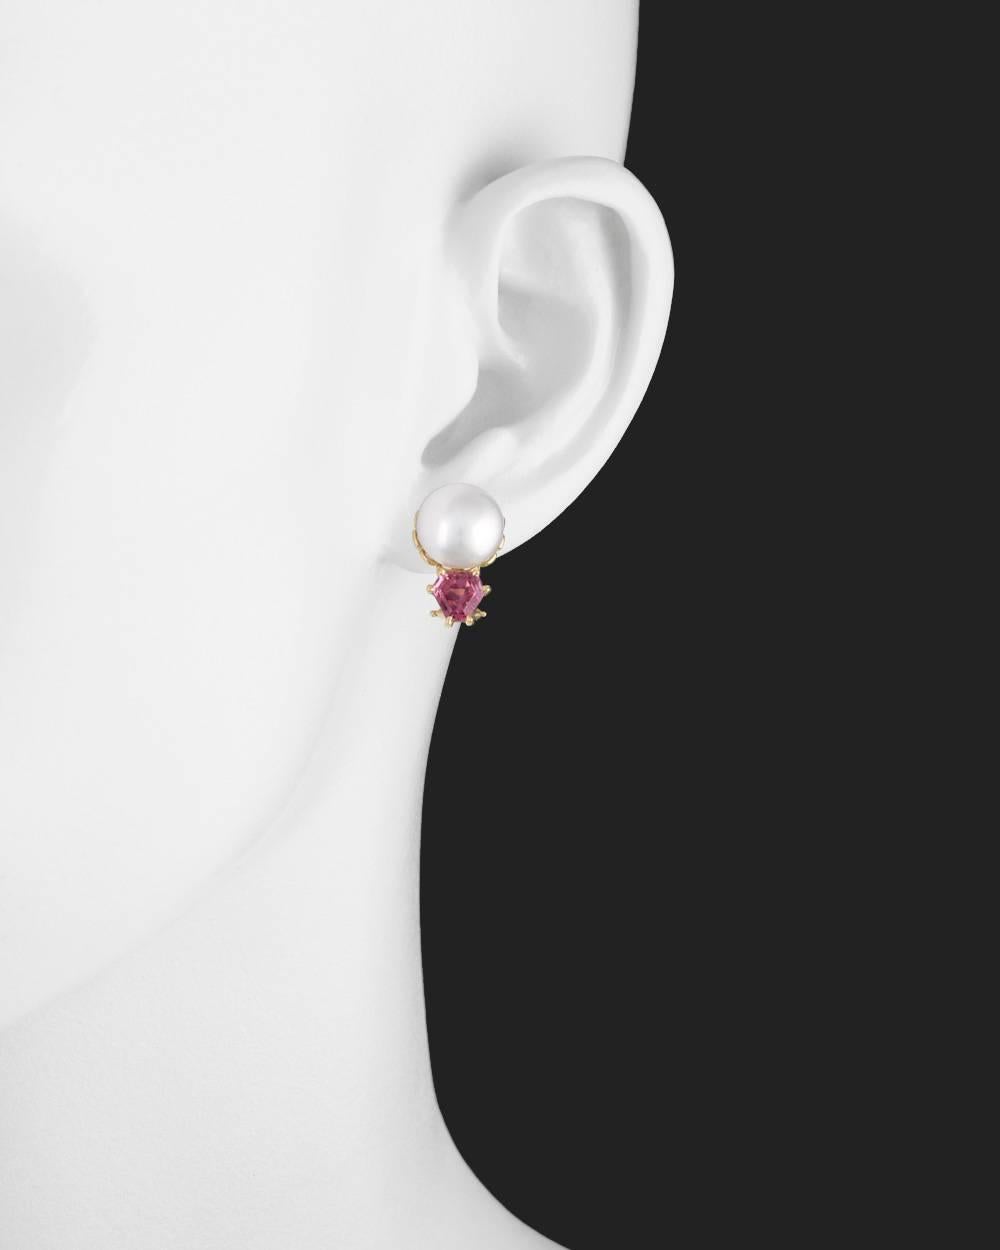 Pearl and pink tourmaline stud earrings, each featuring a freshwater button pearl and a hexagonal pink tourmaline accent, in 18k yellow gold. Pearls measuring 10.6mm in diameter. Pink tourmalines weighing approximately 2.05 total carats. 